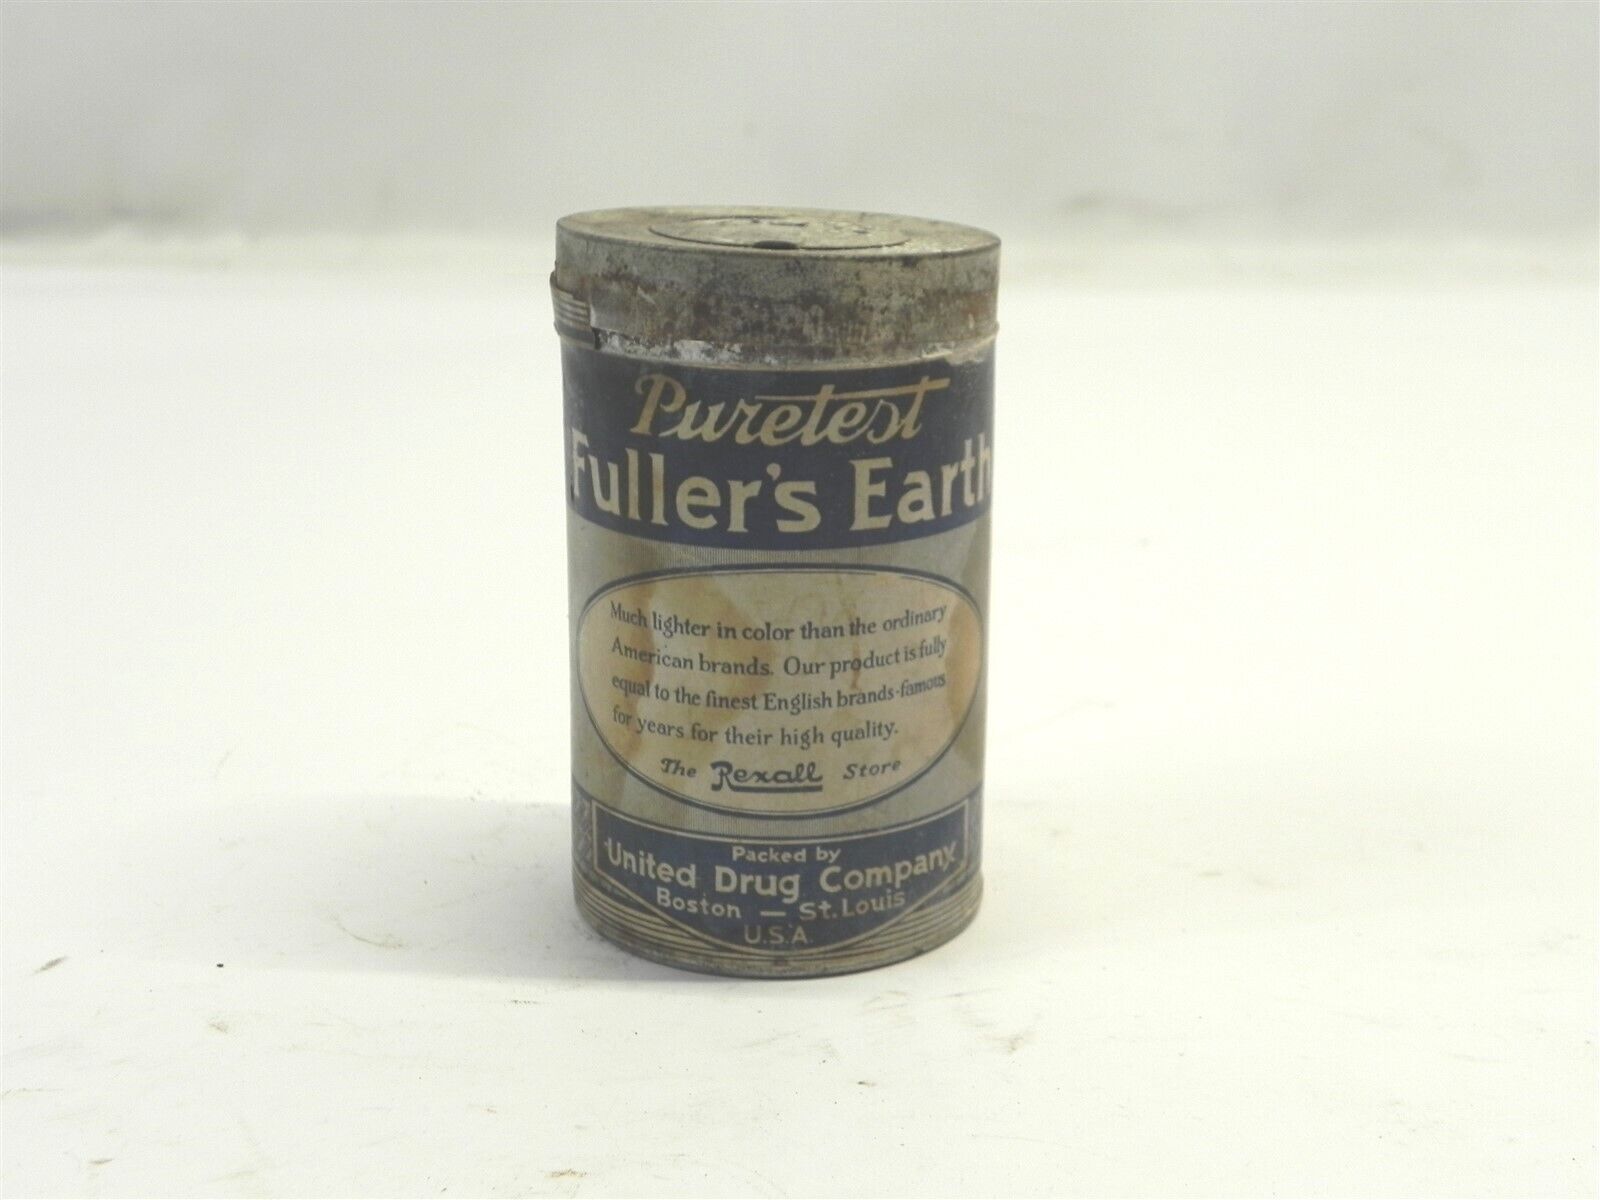 VINTAGE PURETEST FULLER\'S EARTH POWDER 4 OUNCE CAN 1/4 FULL PRE-OWNED USED 